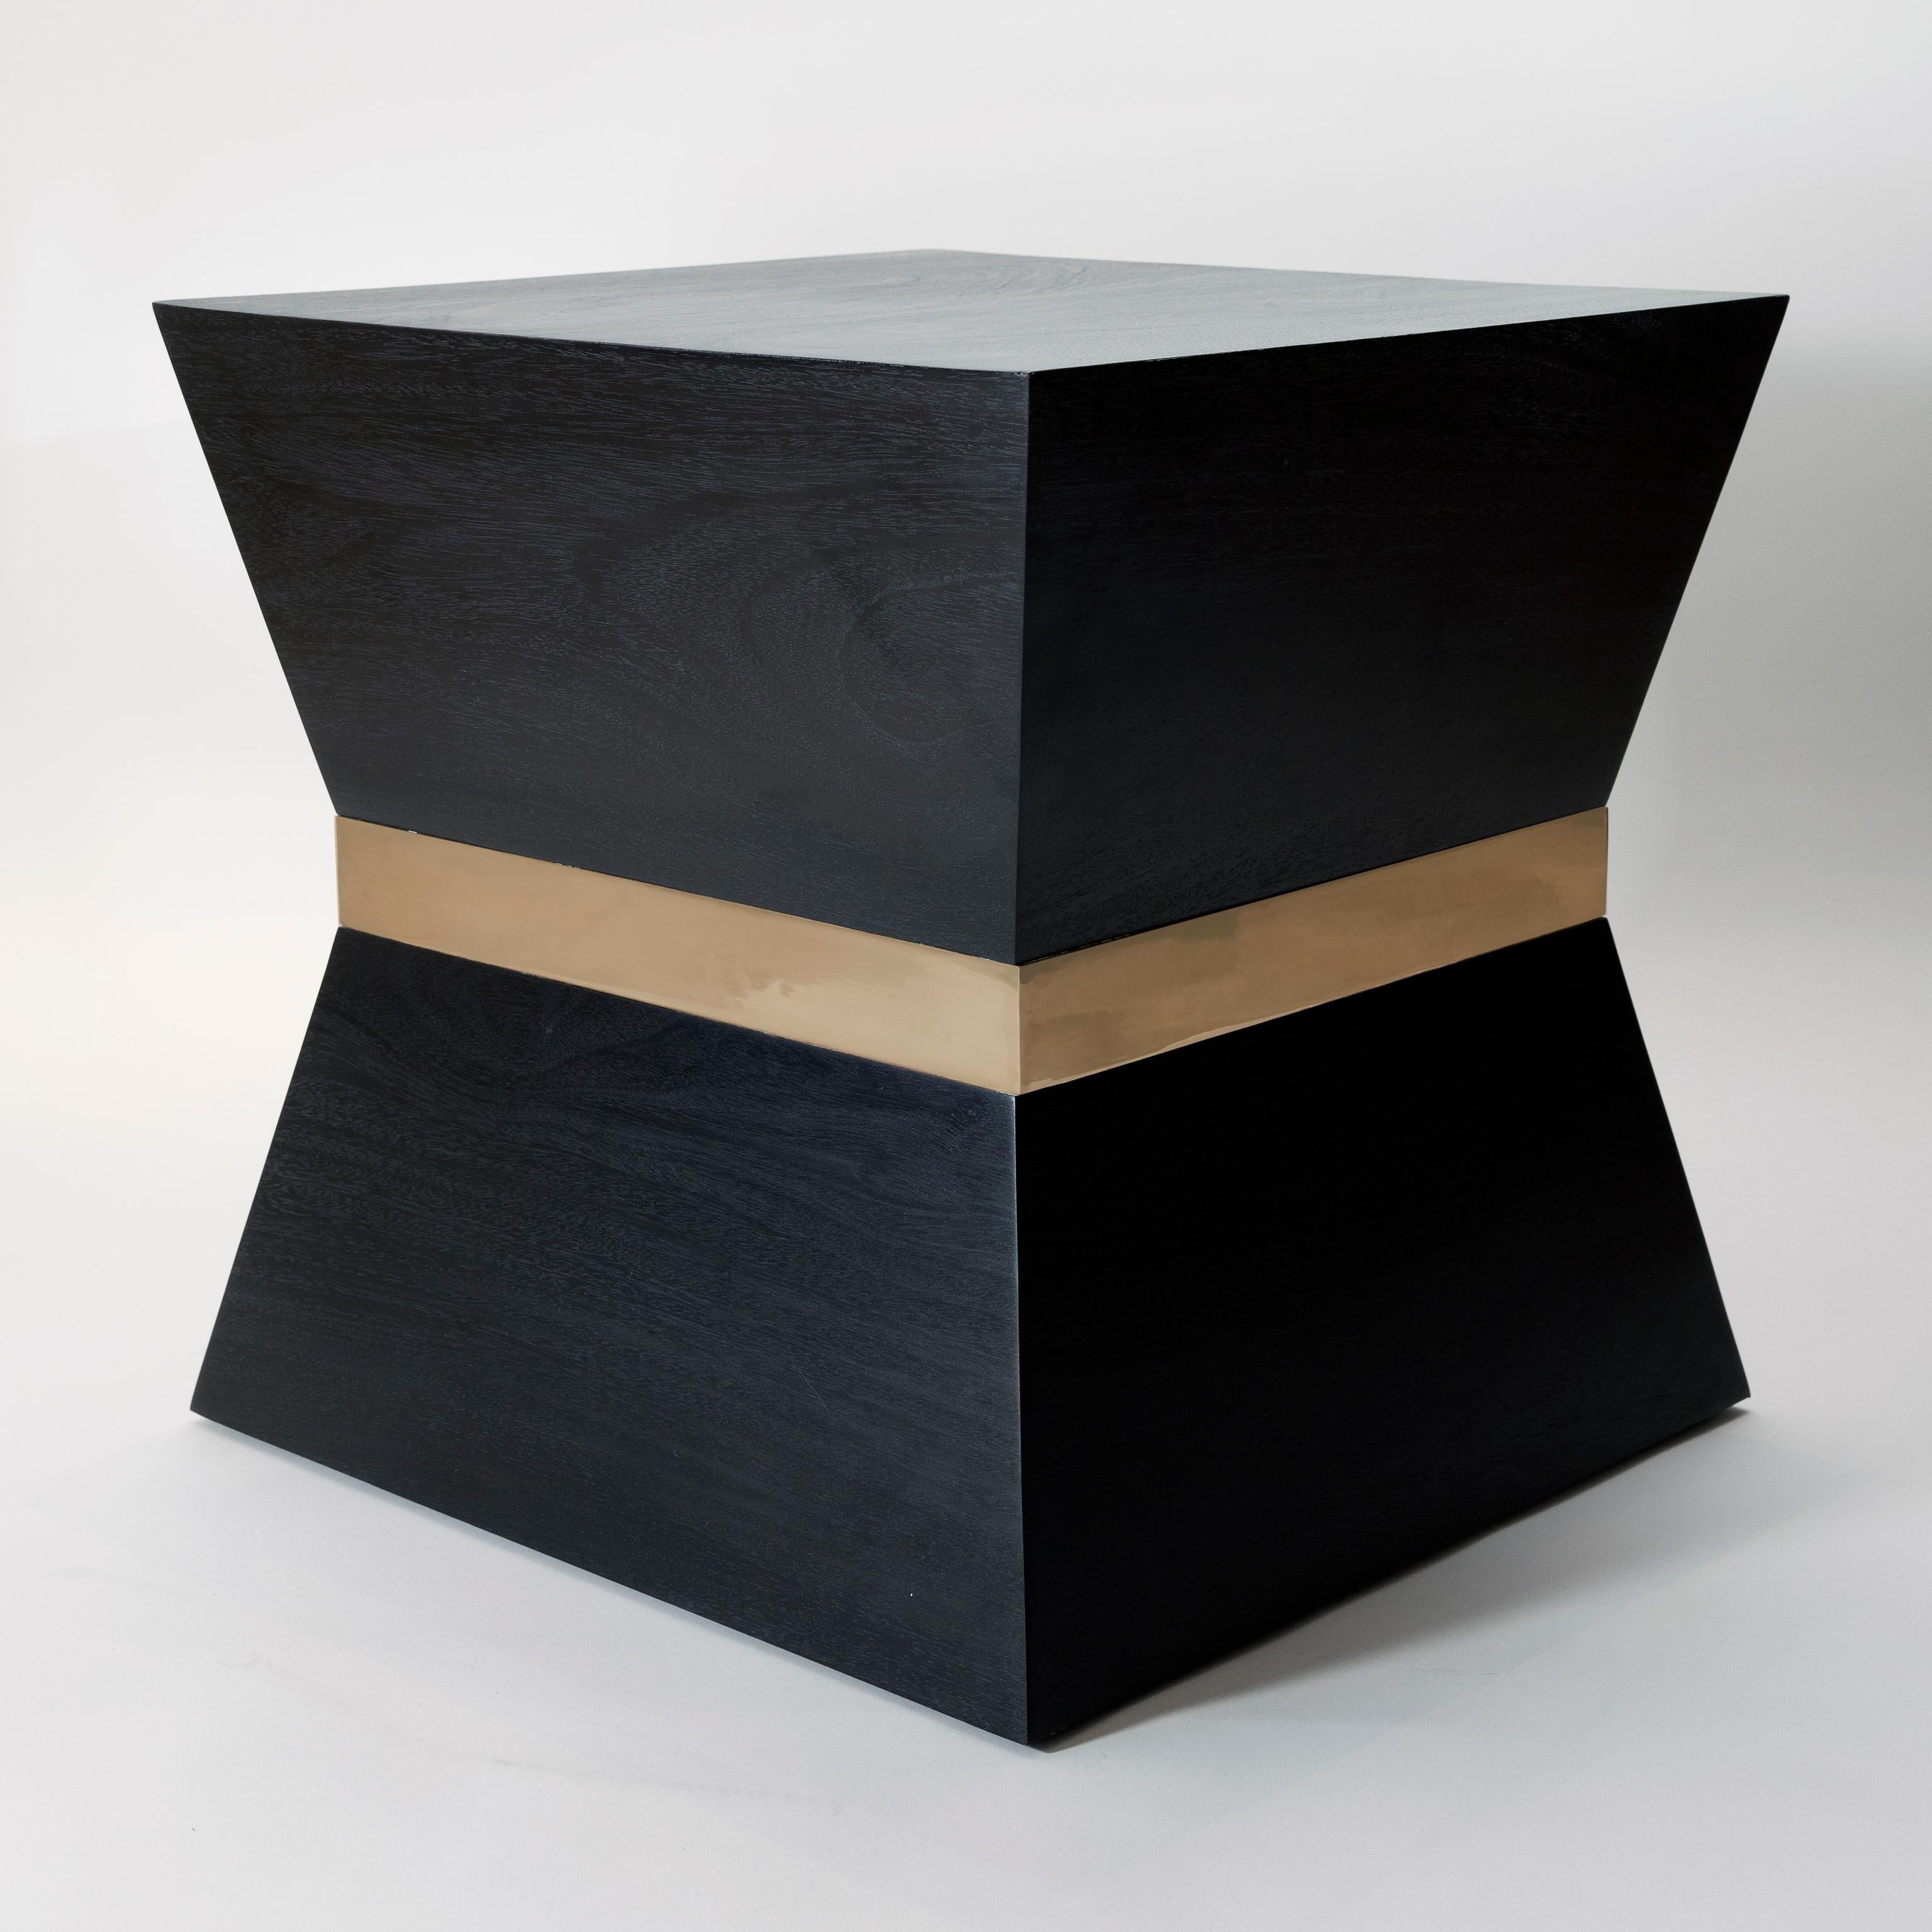 Black (RAL 9004) satin lacquer tapered ash side table with brass trim. Also available in white (RAL 9001) satin lacquer ash with black (RAL 9004) trim.

Measures: W 50 x D 50 x H 50 cm.

Currently in stock, 10 - 14 weeks lead time for large